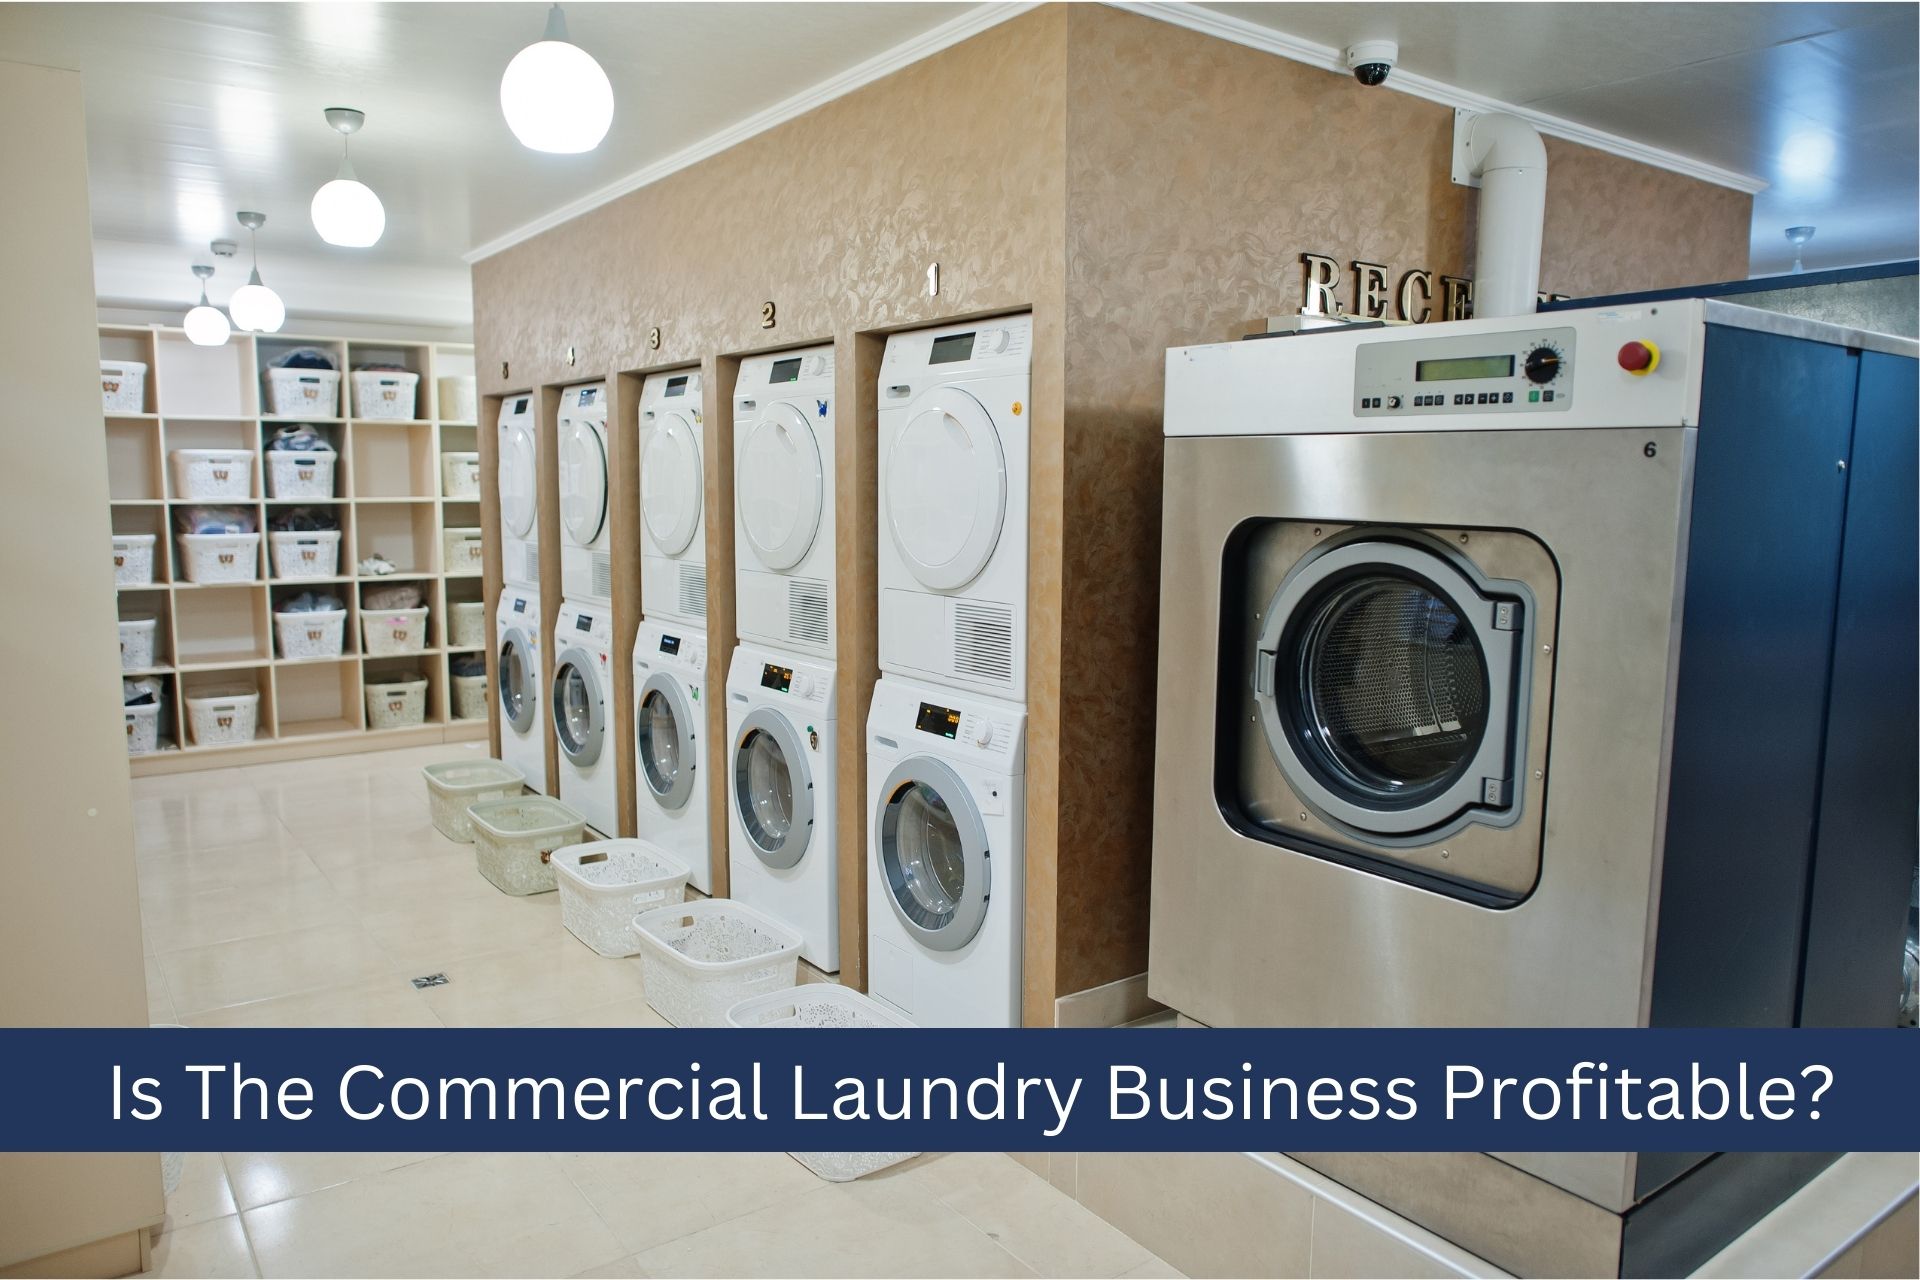 Is the Commercial Laundry Business Profitable?